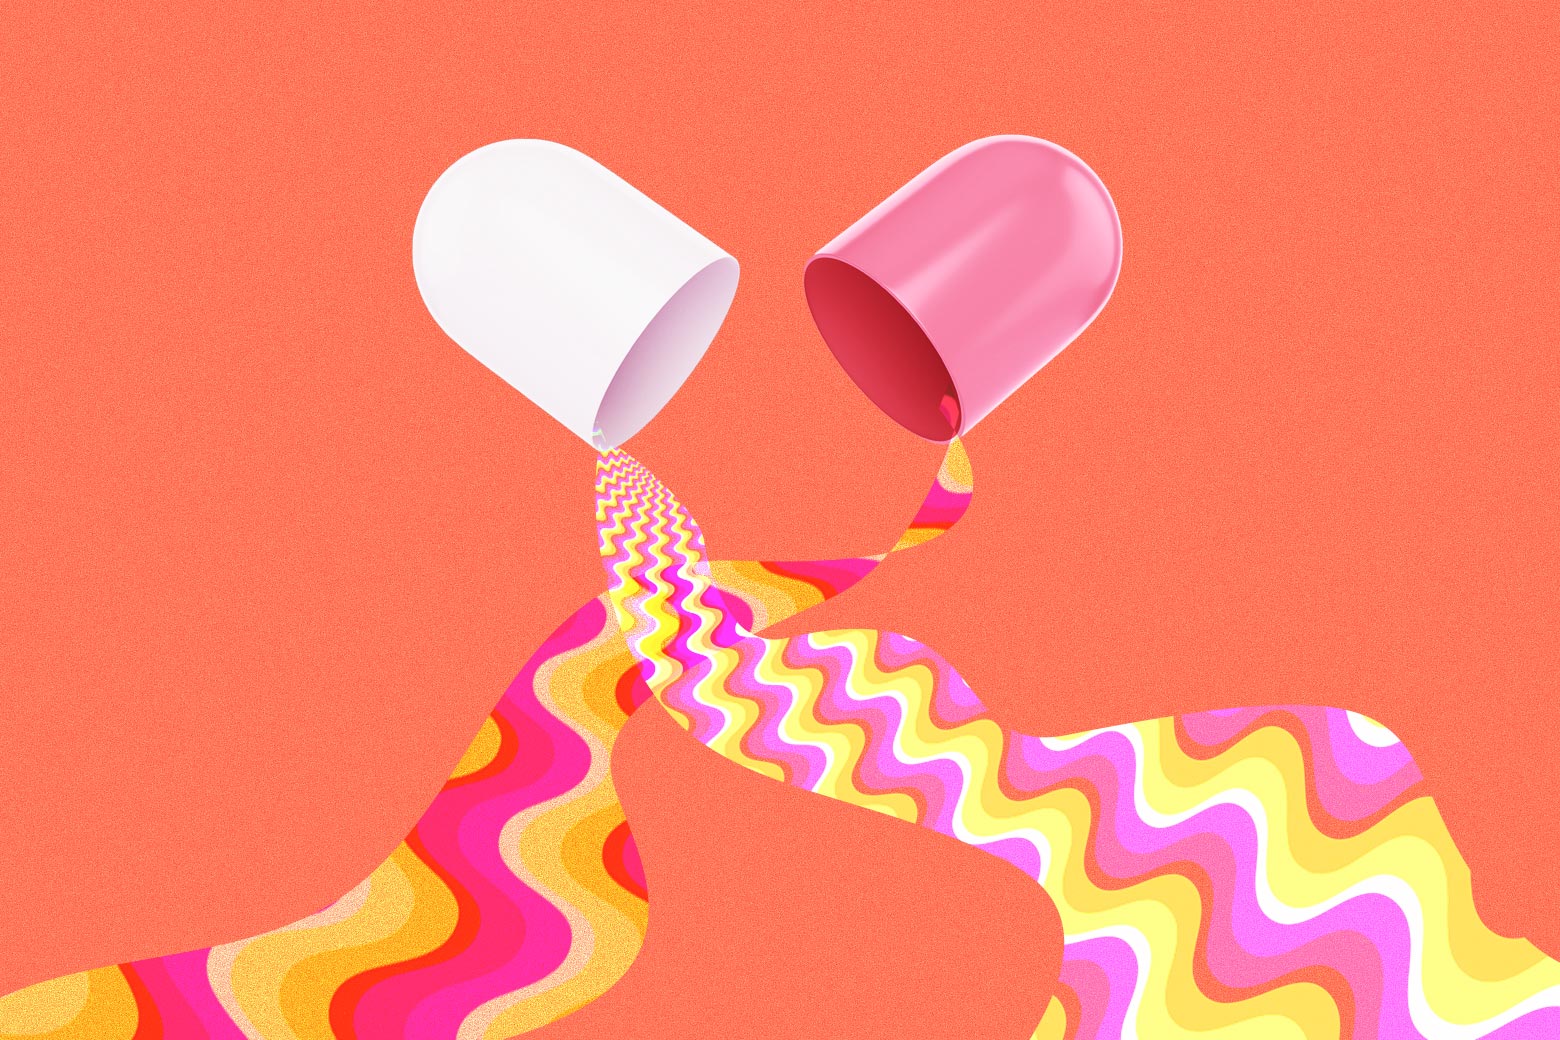 A capsule split open with multicolored psychedelic rivers spilling out of the two halves